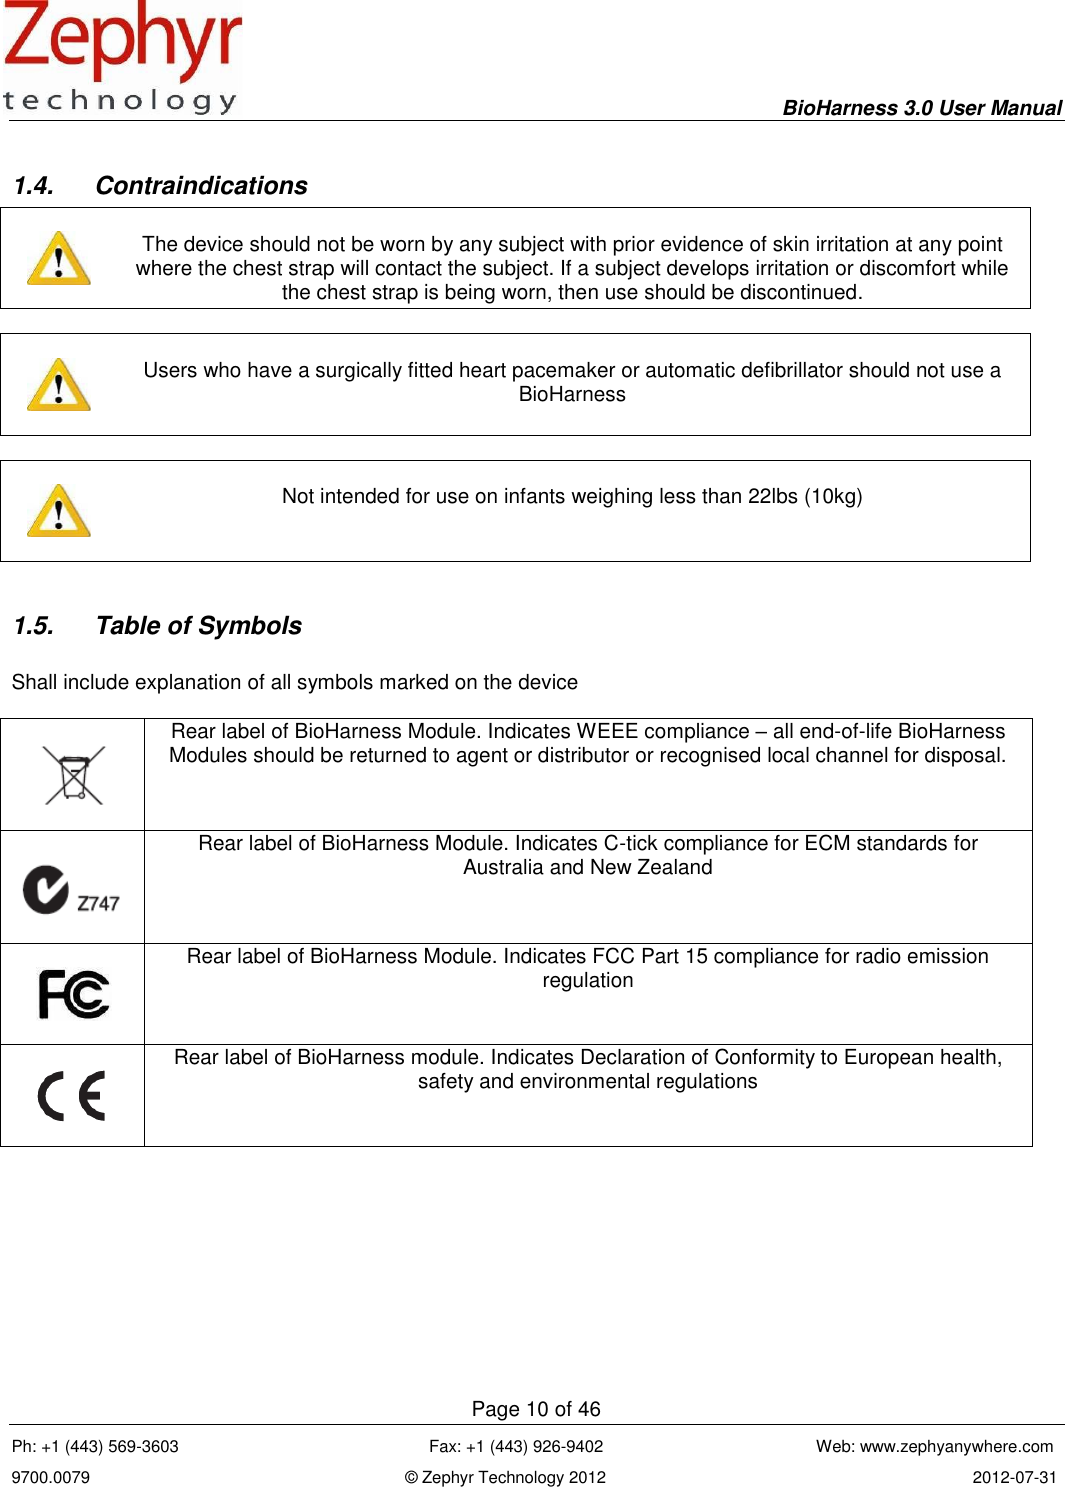     BioHarness 3.0 User Manual  Page 10 of 46 Ph: +1 (443) 569-3603                                                      Fax: +1 (443) 926-9402                                              Web: www.zephyanywhere.com 9700.0079                                                                    © Zephyr Technology 2012                                                                               2012-07-31                                                                                                                                      1.4.  Contraindications     The device should not be worn by any subject with prior evidence of skin irritation at any point where the chest strap will contact the subject. If a subject develops irritation or discomfort while the chest strap is being worn, then use should be discontinued.      Users who have a surgically fitted heart pacemaker or automatic defibrillator should not use a BioHarness      Not intended for use on infants weighing less than 22lbs (10kg)  1.5.  Table of Symbols  Shall include explanation of all symbols marked on the device     Rear label of BioHarness Module. Indicates WEEE compliance – all end-of-life BioHarness Modules should be returned to agent or distributor or recognised local channel for disposal.    Rear label of BioHarness Module. Indicates C-tick compliance for ECM standards for Australia and New Zealand    Rear label of BioHarness Module. Indicates FCC Part 15 compliance for radio emission regulation    Rear label of BioHarness module. Indicates Declaration of Conformity to European health, safety and environmental regulations 